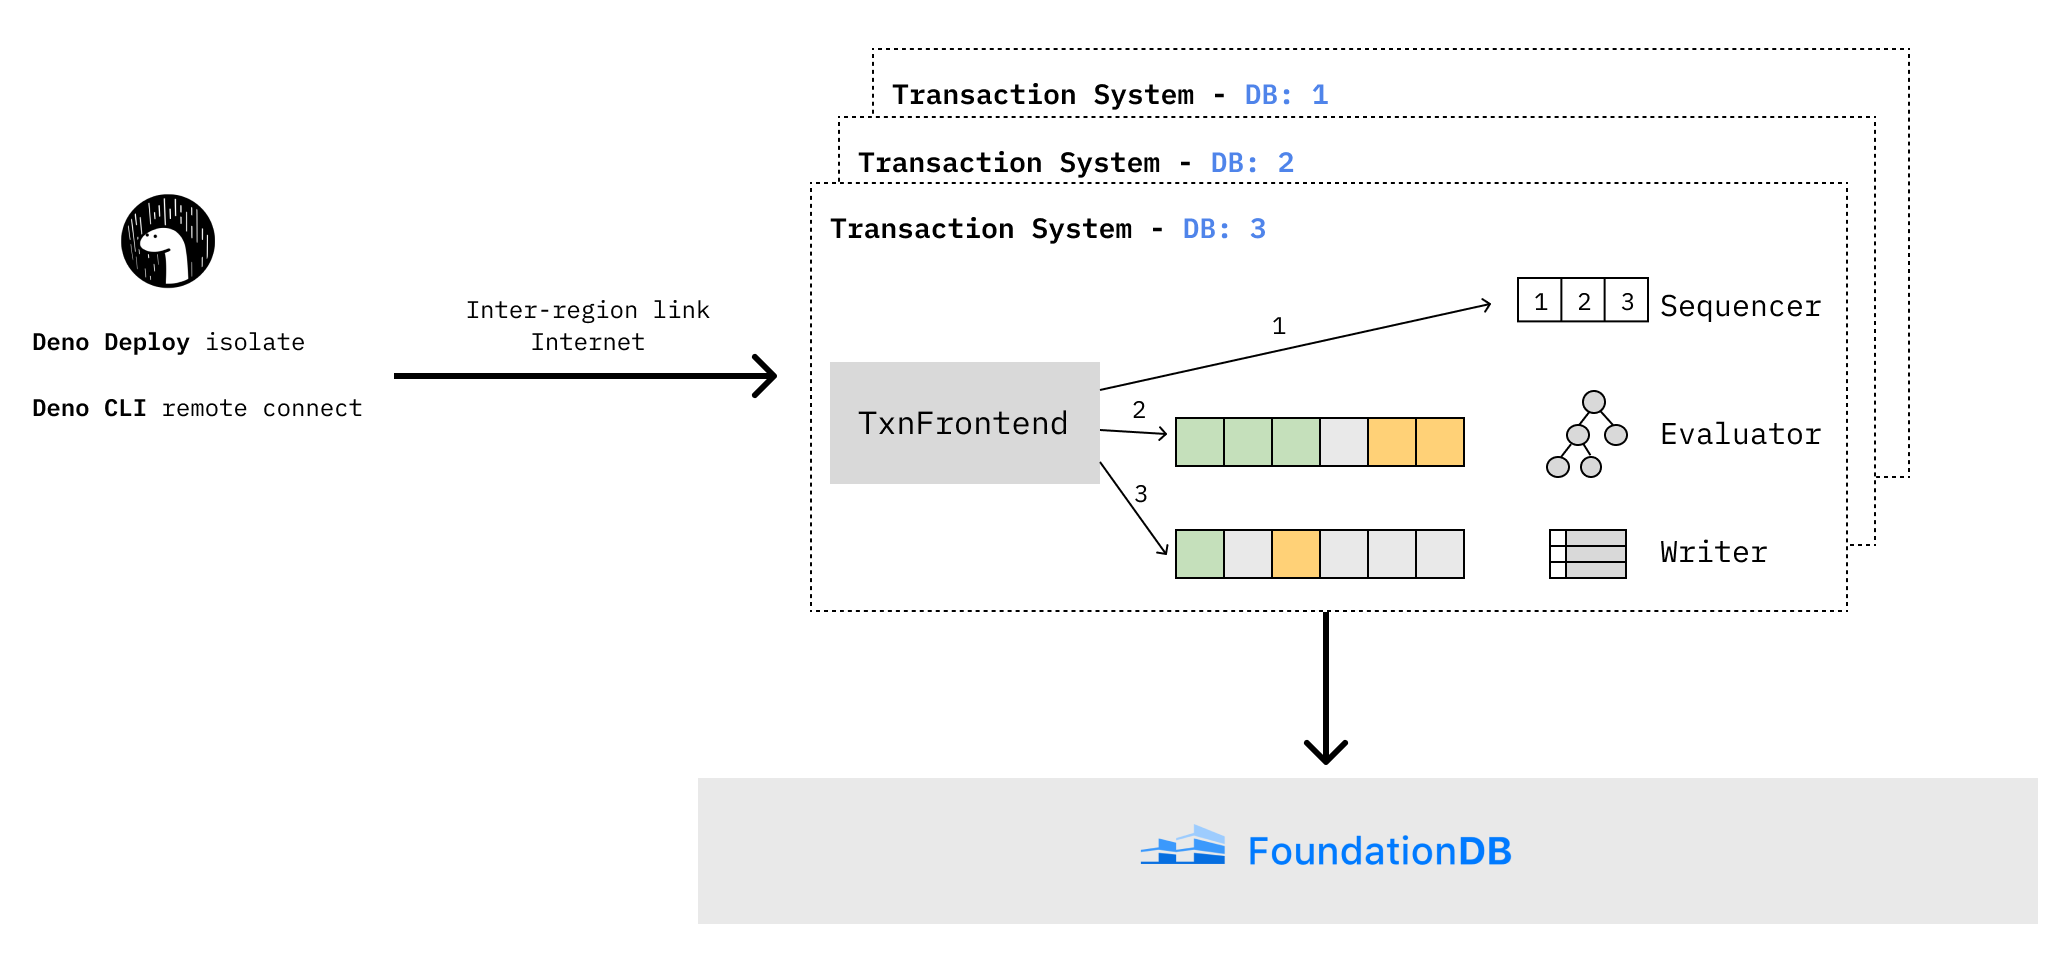 Deno Deploy Transaction Layer that interfaces between Deno Deploy isolates and FoundationDB